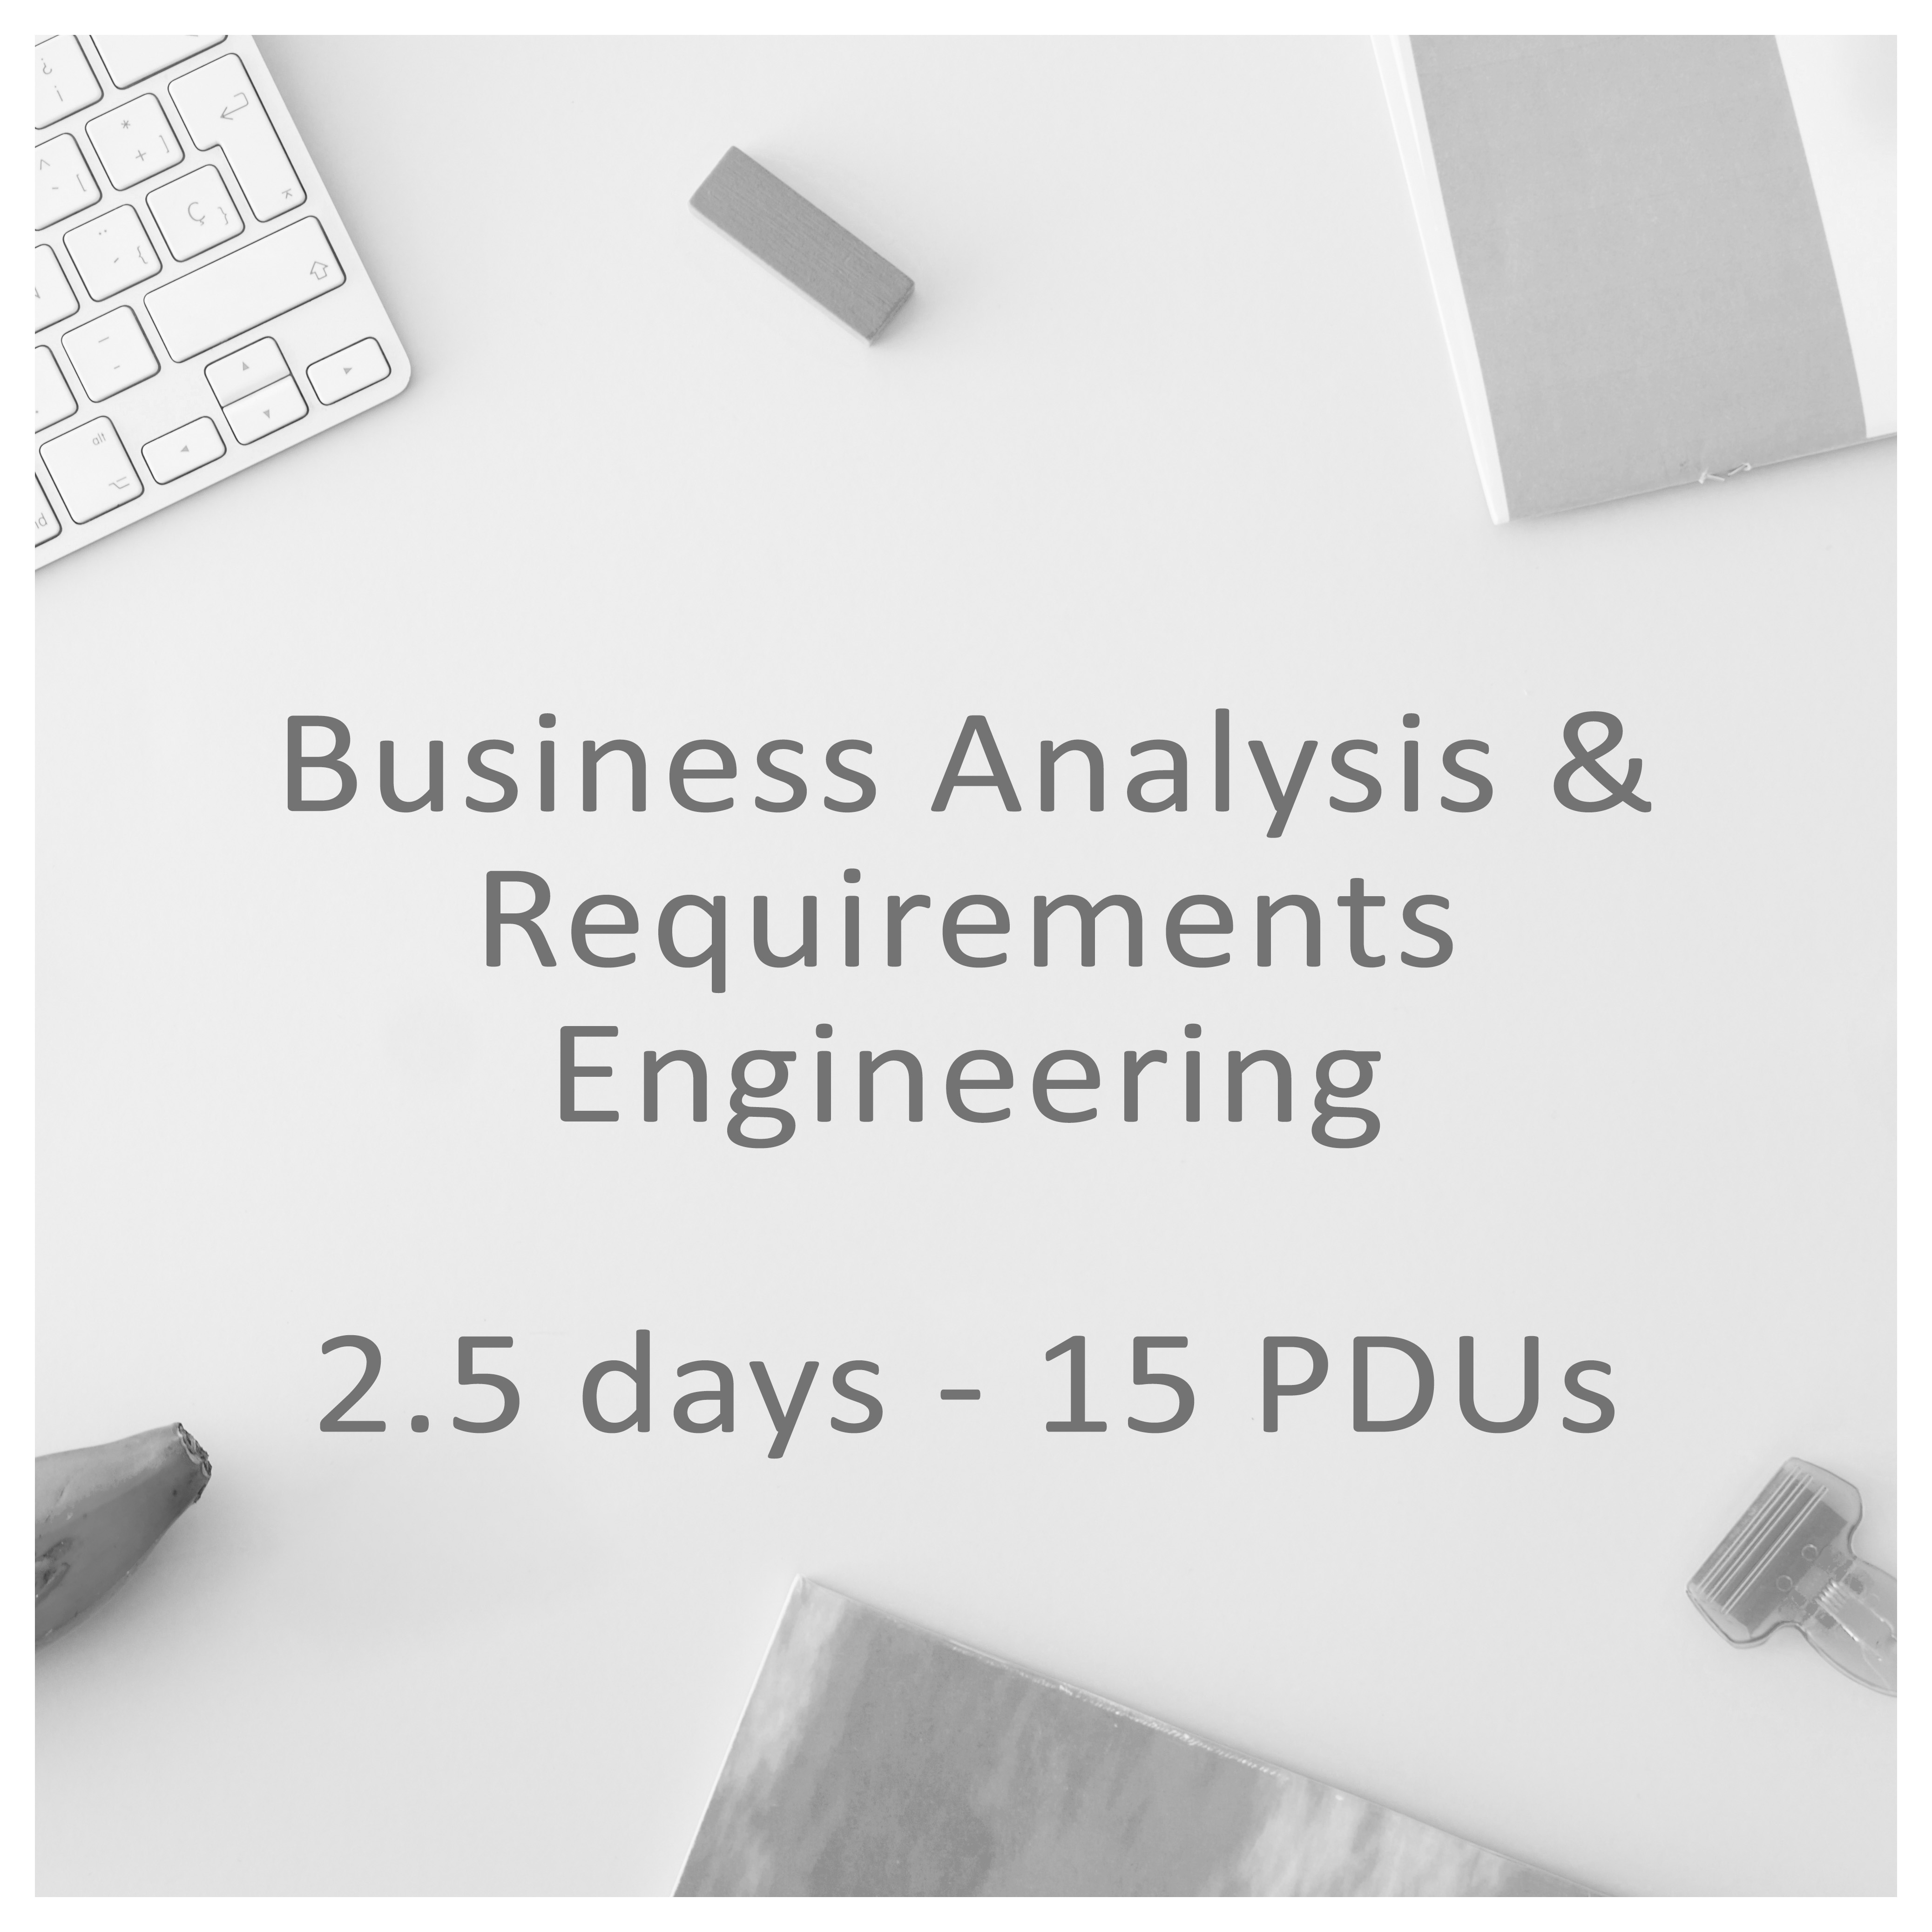 Business Analysis & Requirements Engineering